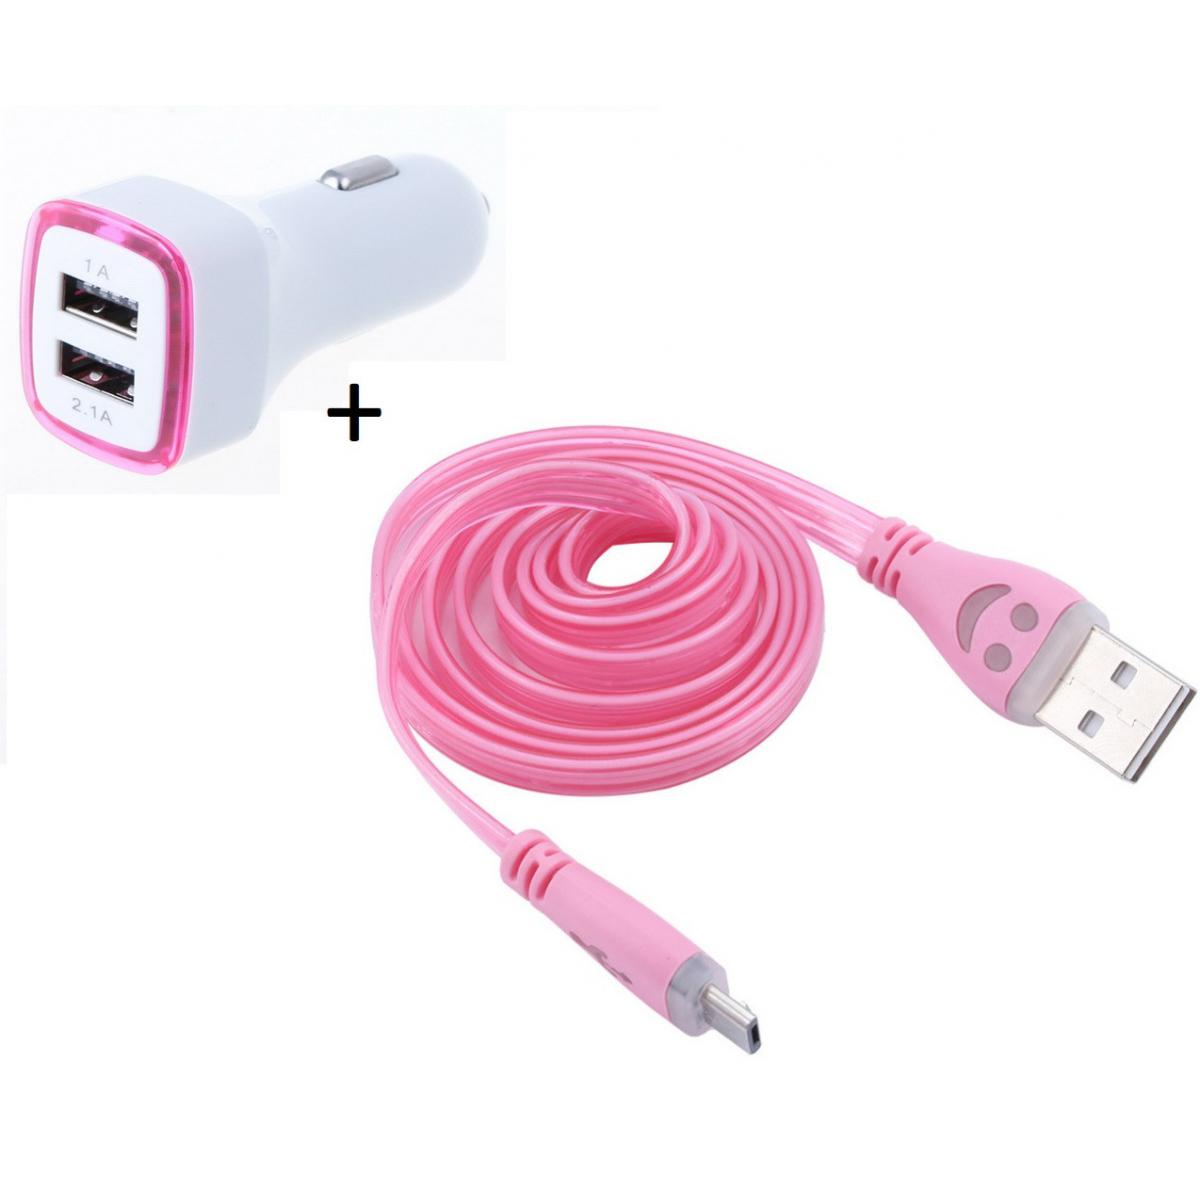 Shot - Pack Chargeur Voiture pour ALCATEL 5V Smartphone Micro USB (Cable Smiley + Double Adaptateur LED Allume Cigare) (ROSE) - Chargeur Voiture 12V